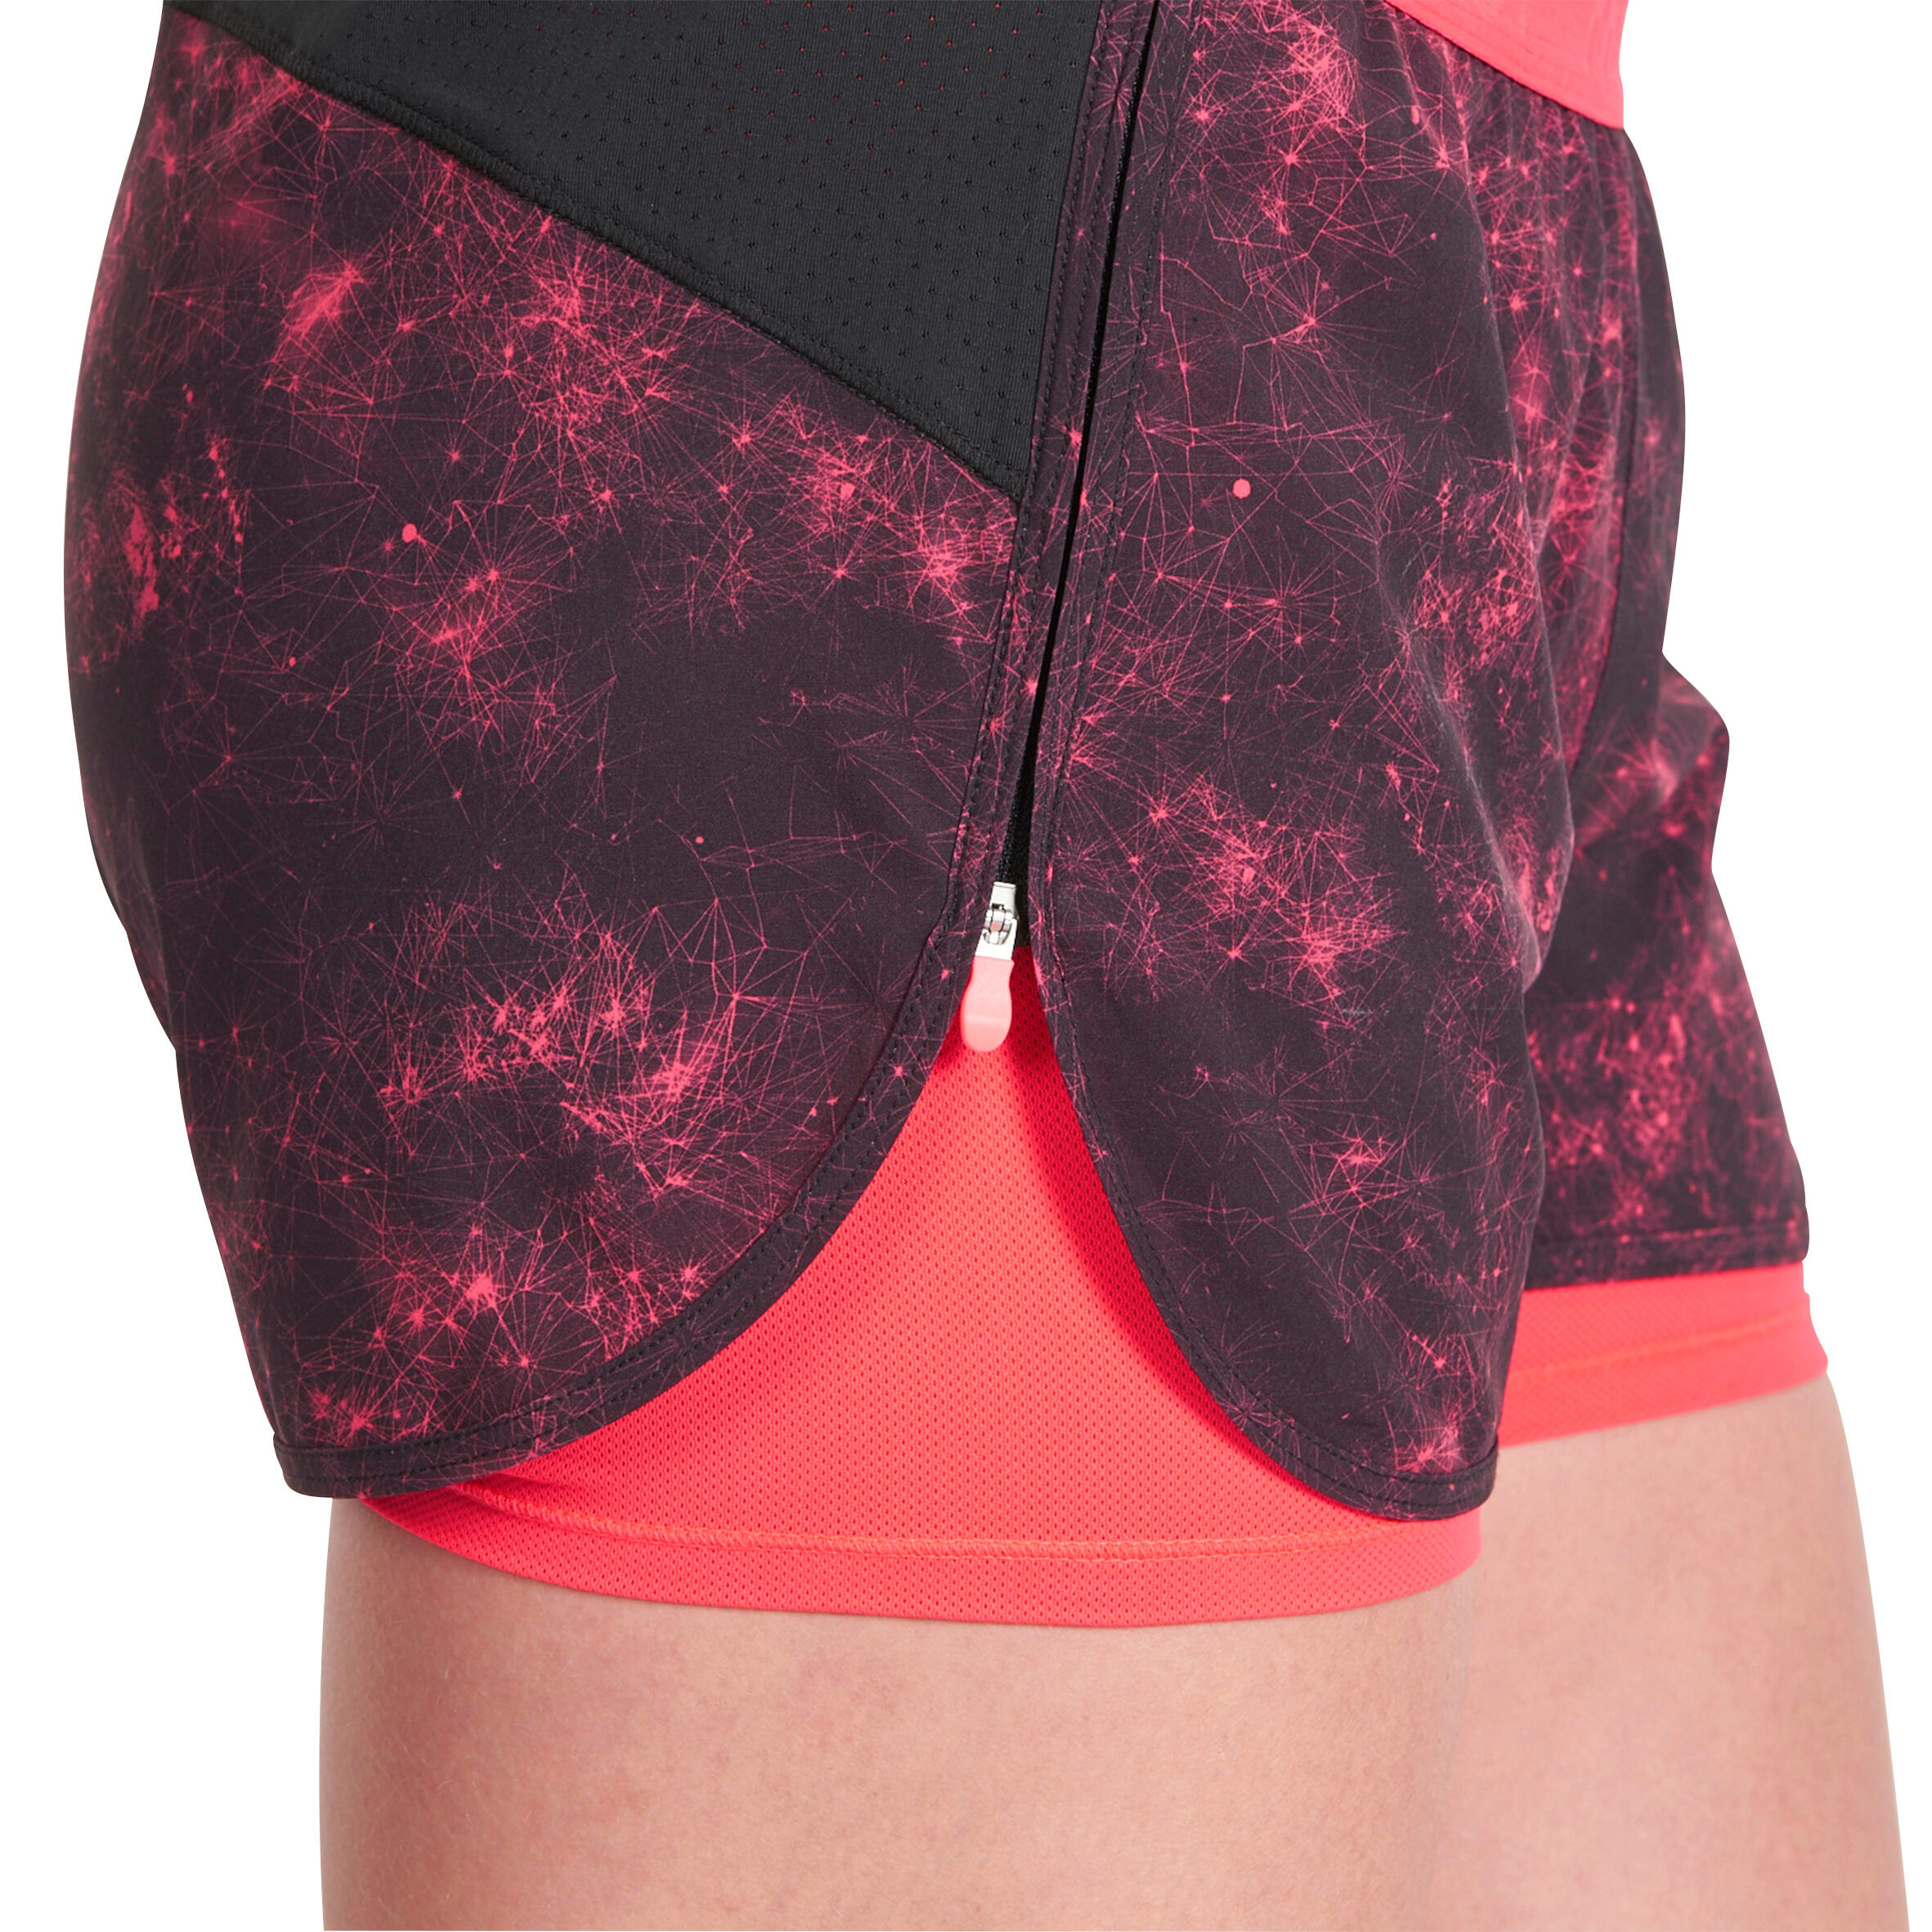 Energy Xtreme Women's 2-in-1 Fitness Shorts - Black/Pink Print 8/14